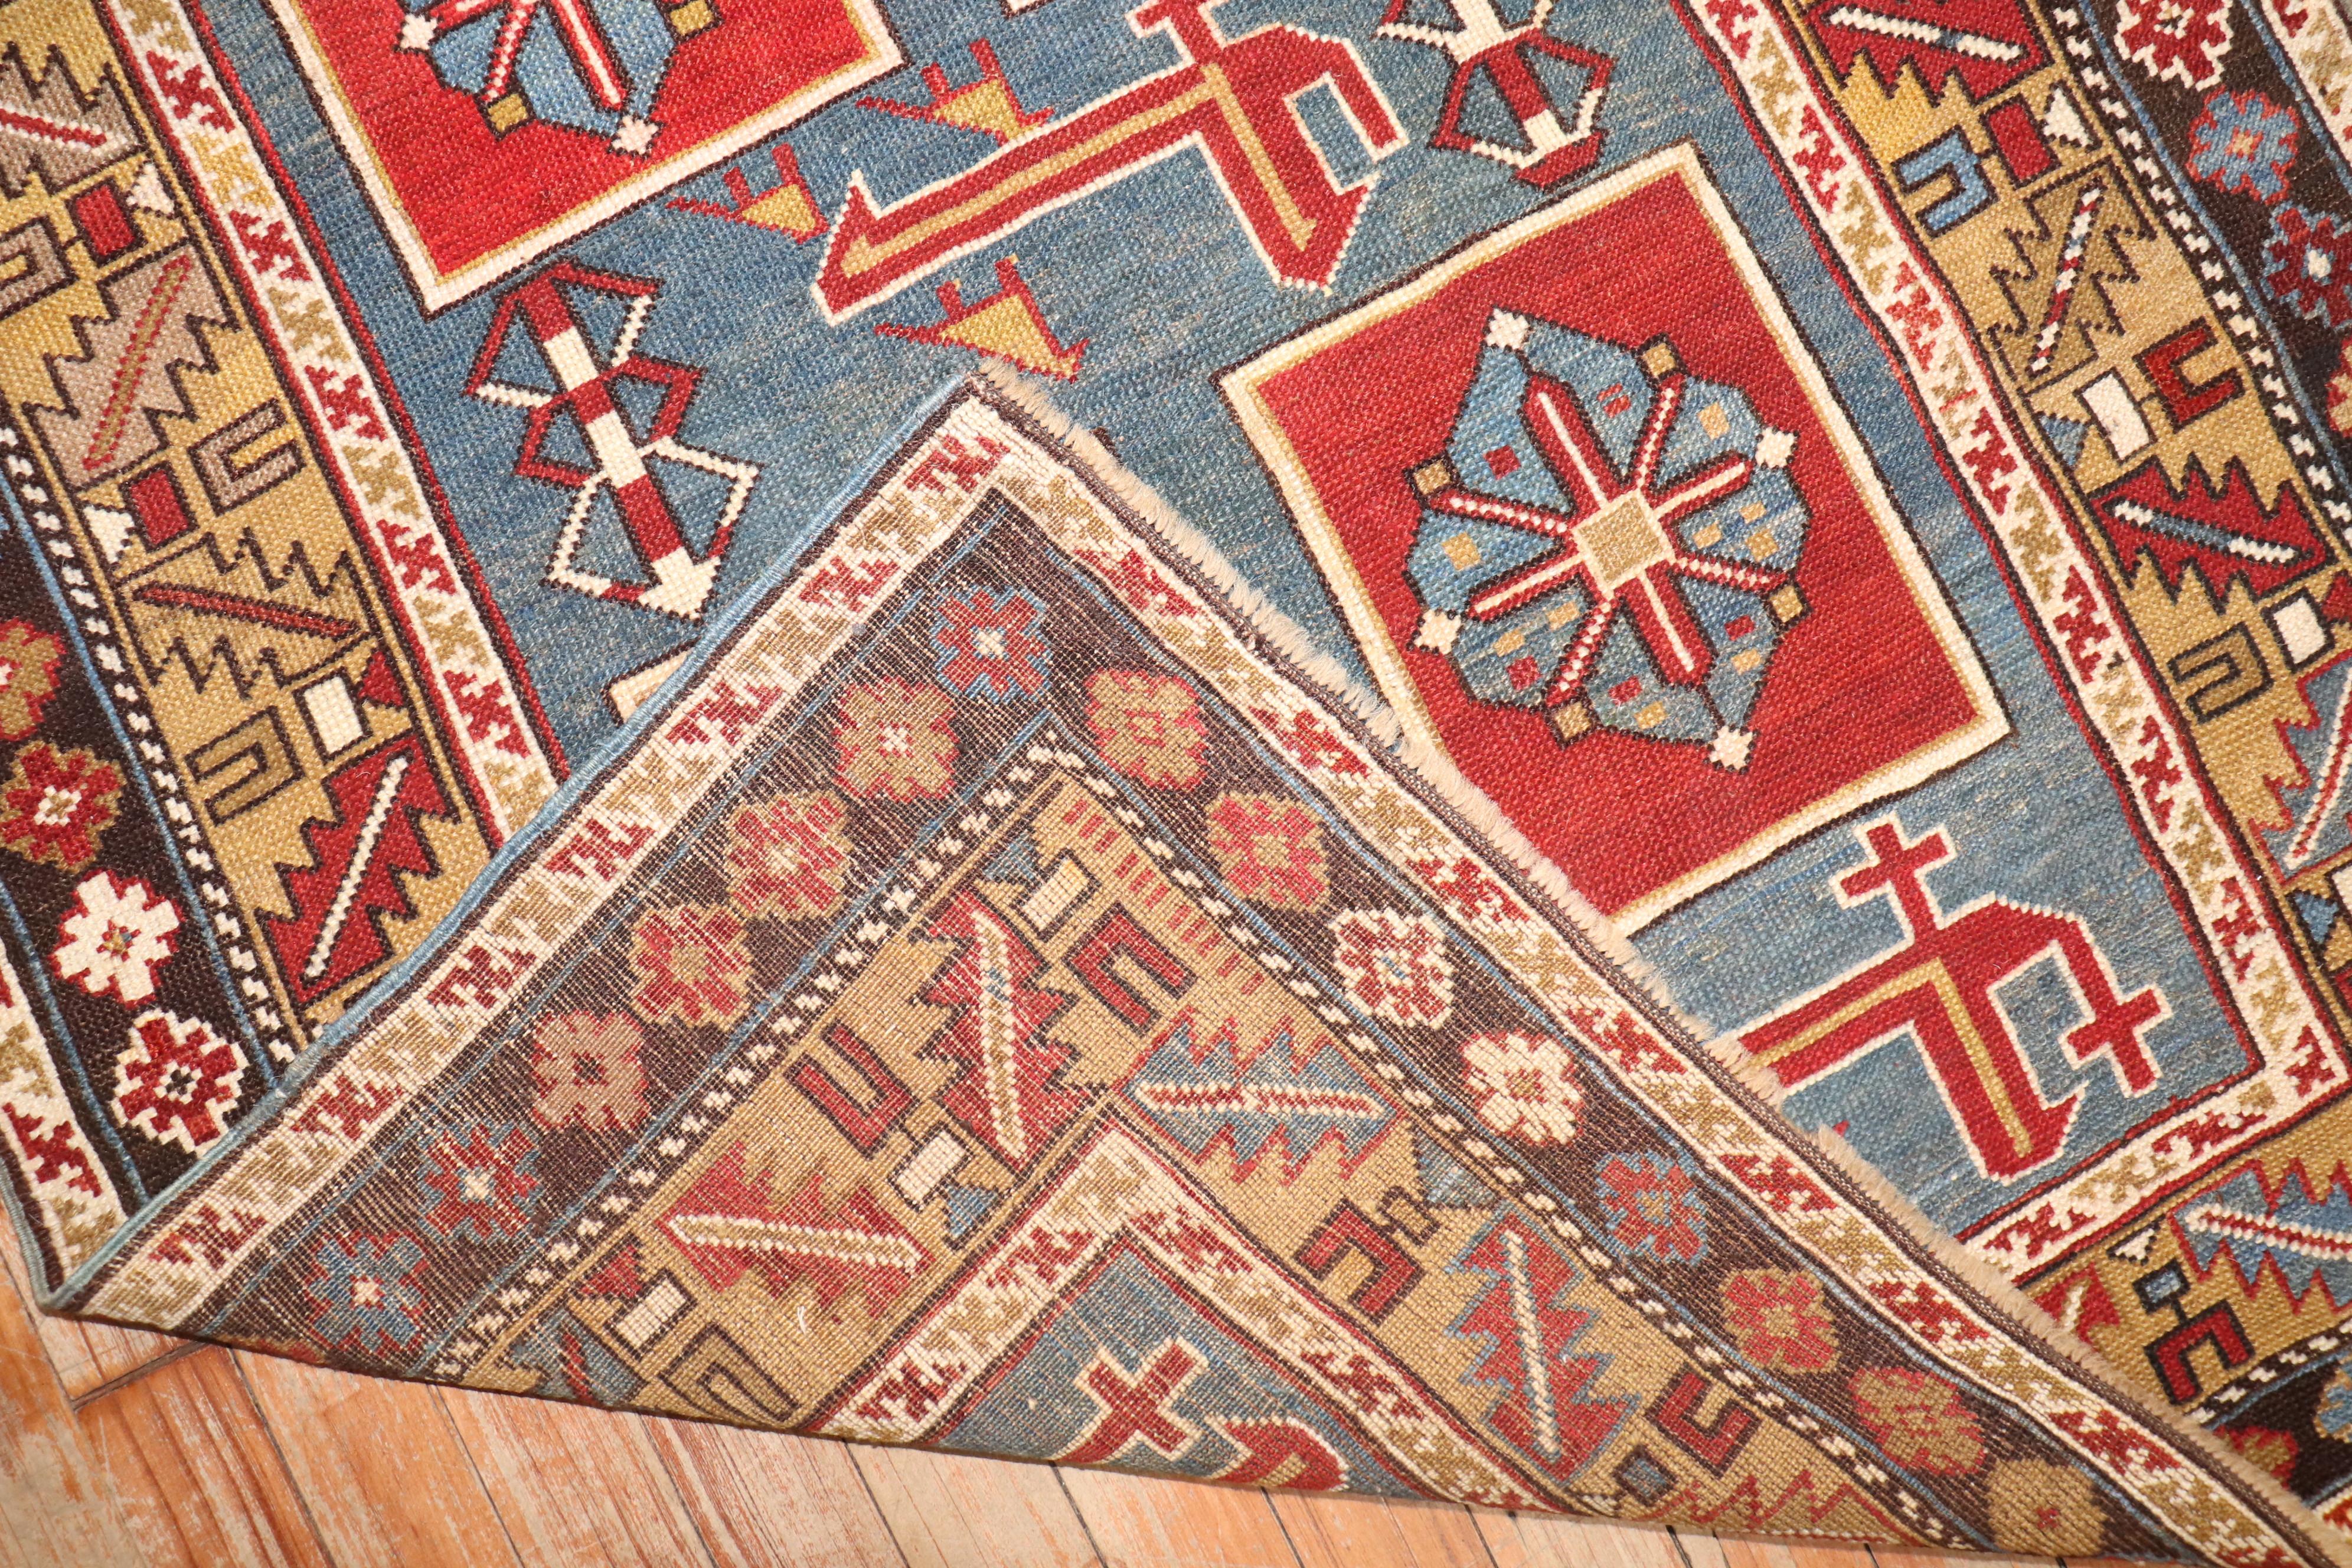 A late 19th century  woven antique Karaghasli Caucasian rug.

3' x 5'

The brilliant colors and use of lateral elements make this a unique addition to any collection. These carpets were introduced into Russian hands by the market demand initially